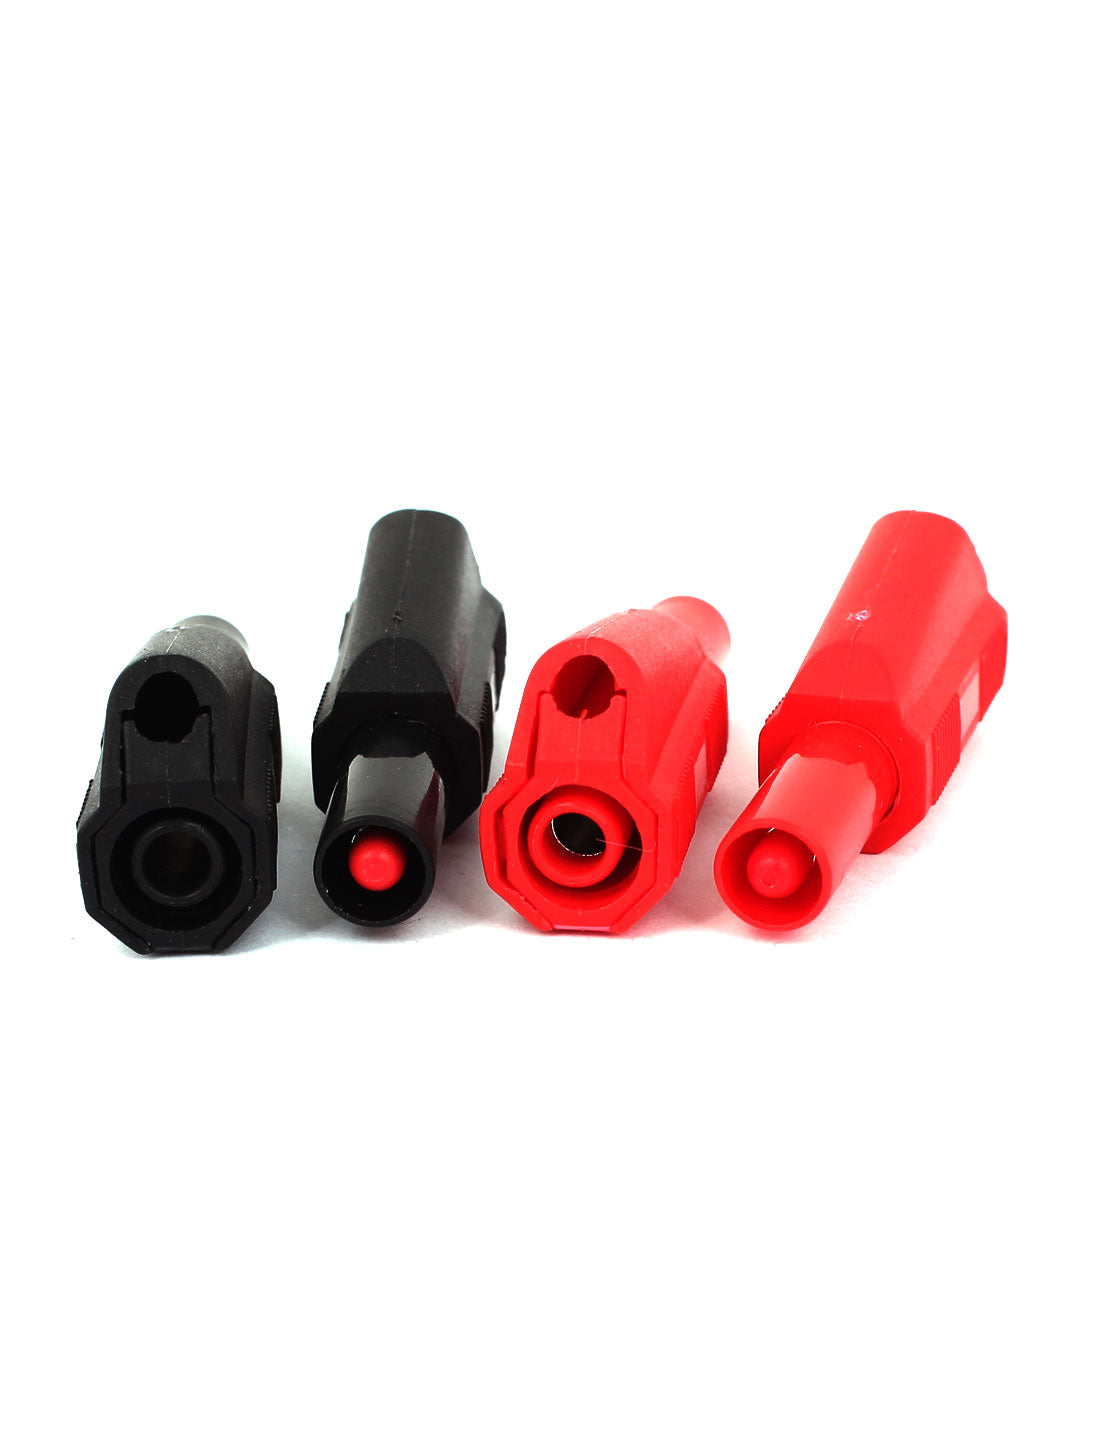 uxcell Uxcell 4 Pcs Multimeter Test Probes Banana Cables Connector Red Black